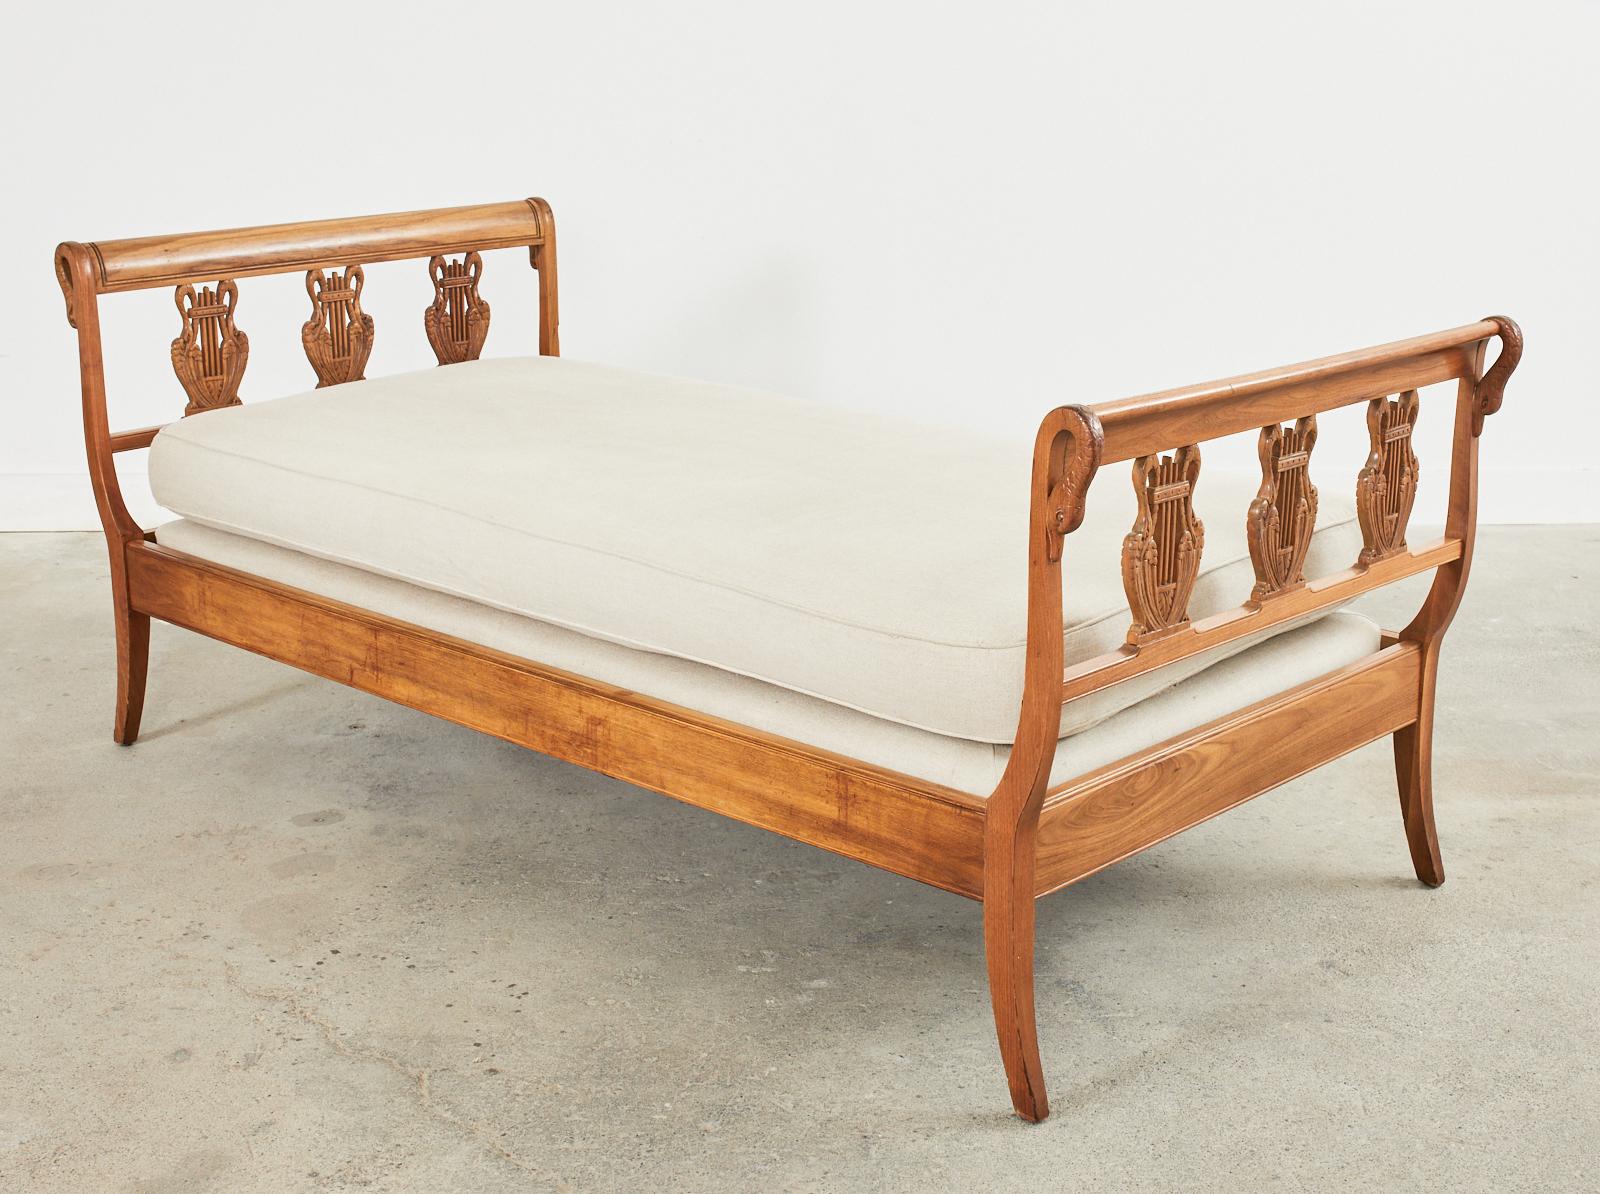 20th Century Neoclassical French Empire Style Swan Neck Daybed